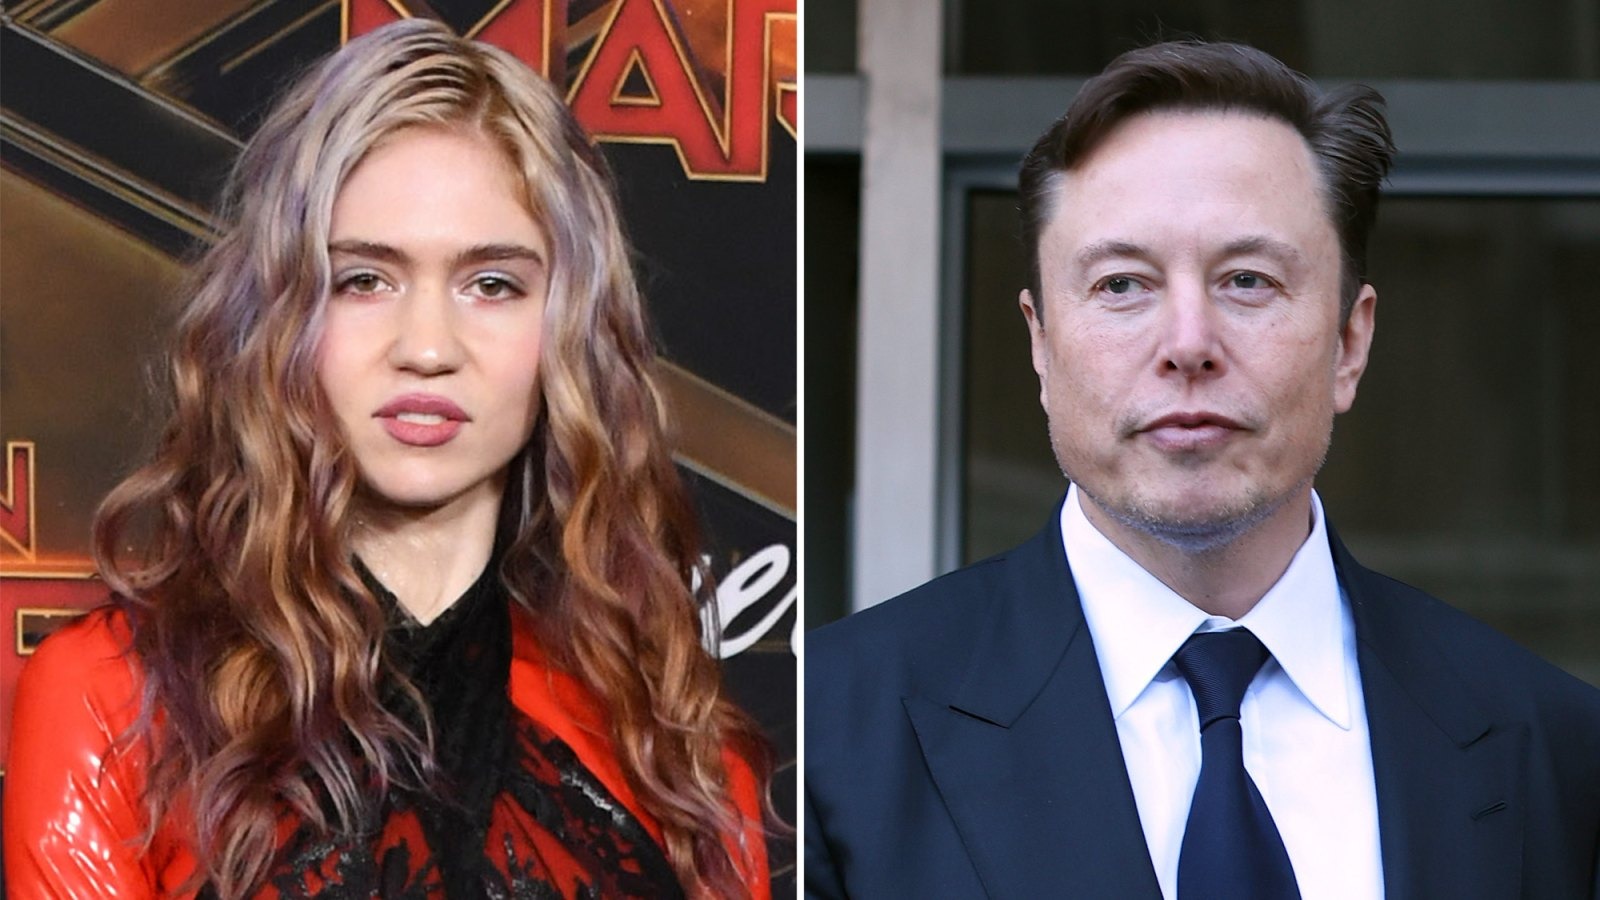 Grimes sues ex Elon Musk over parental rights of their 3 children